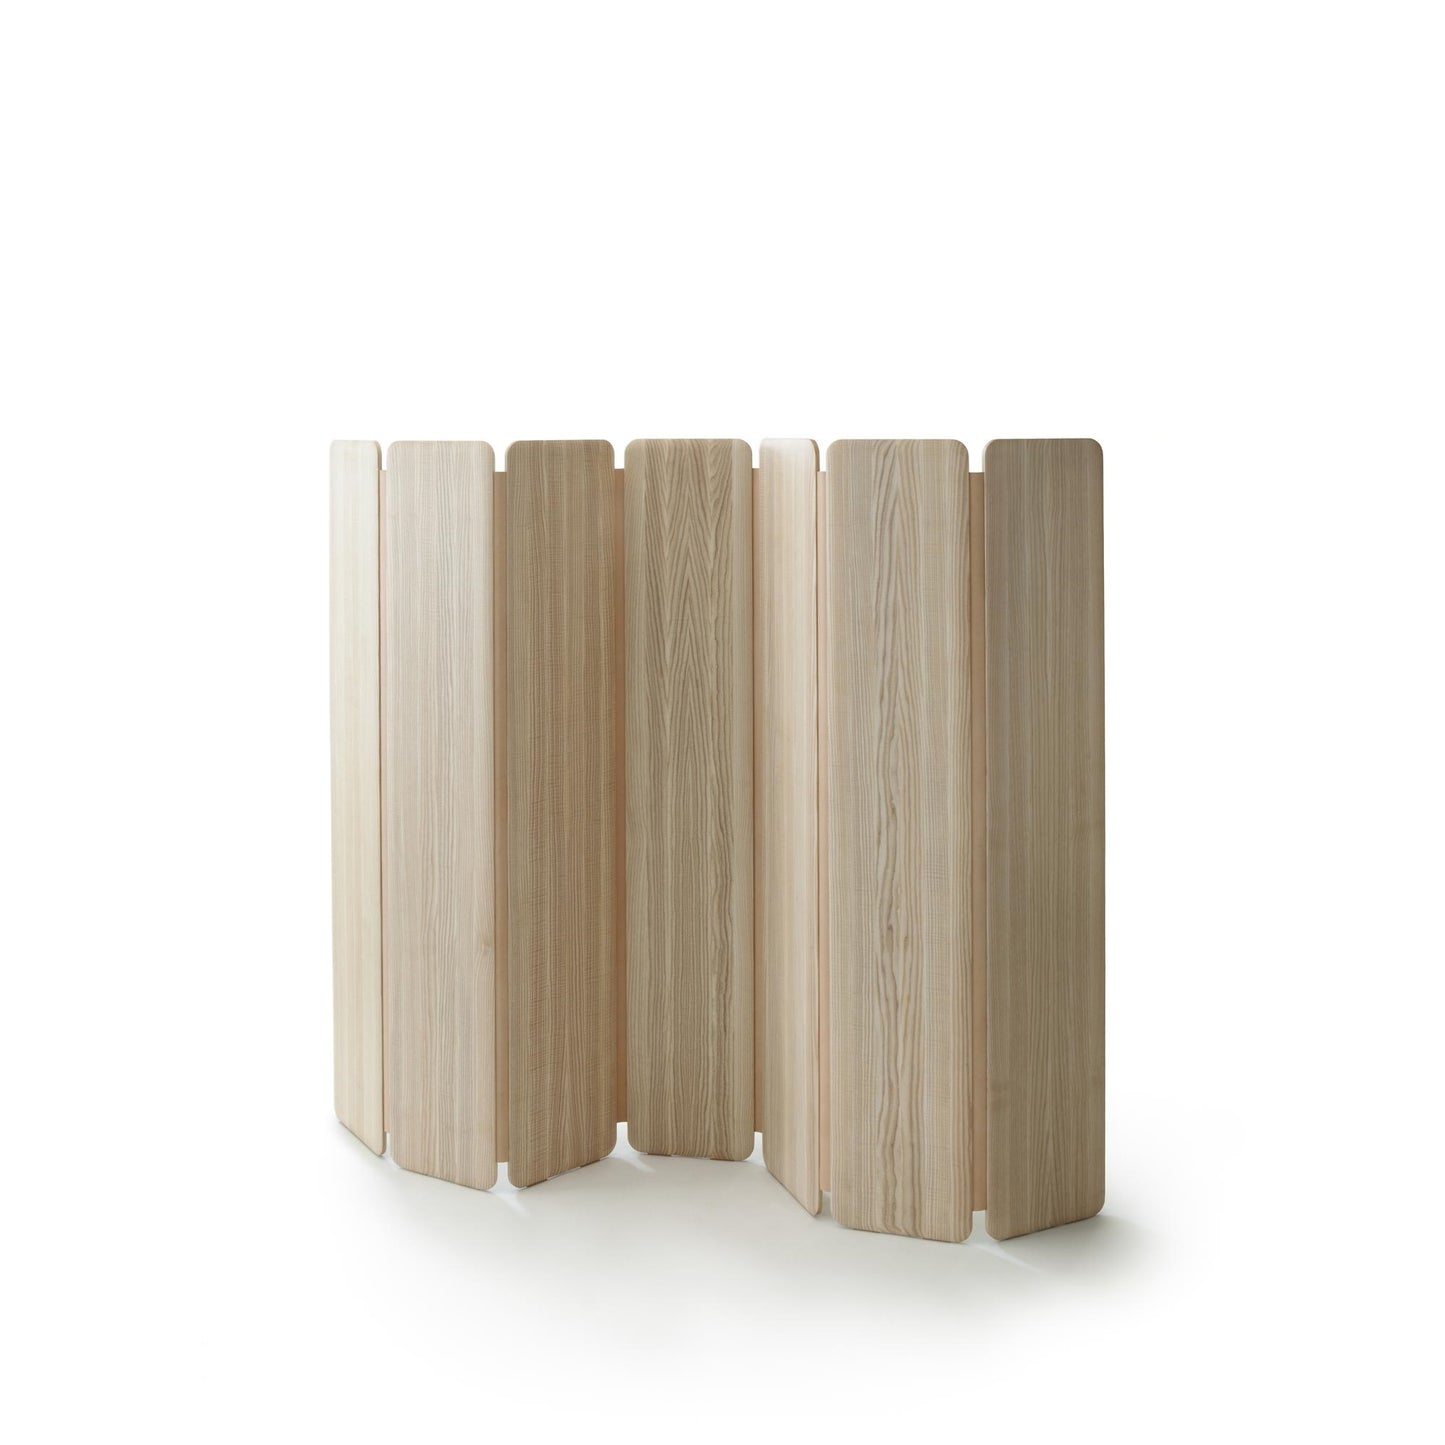 Skandinavia Collection Separate Room Divider by Nikari #Oiled Ashtray/Nude Leather